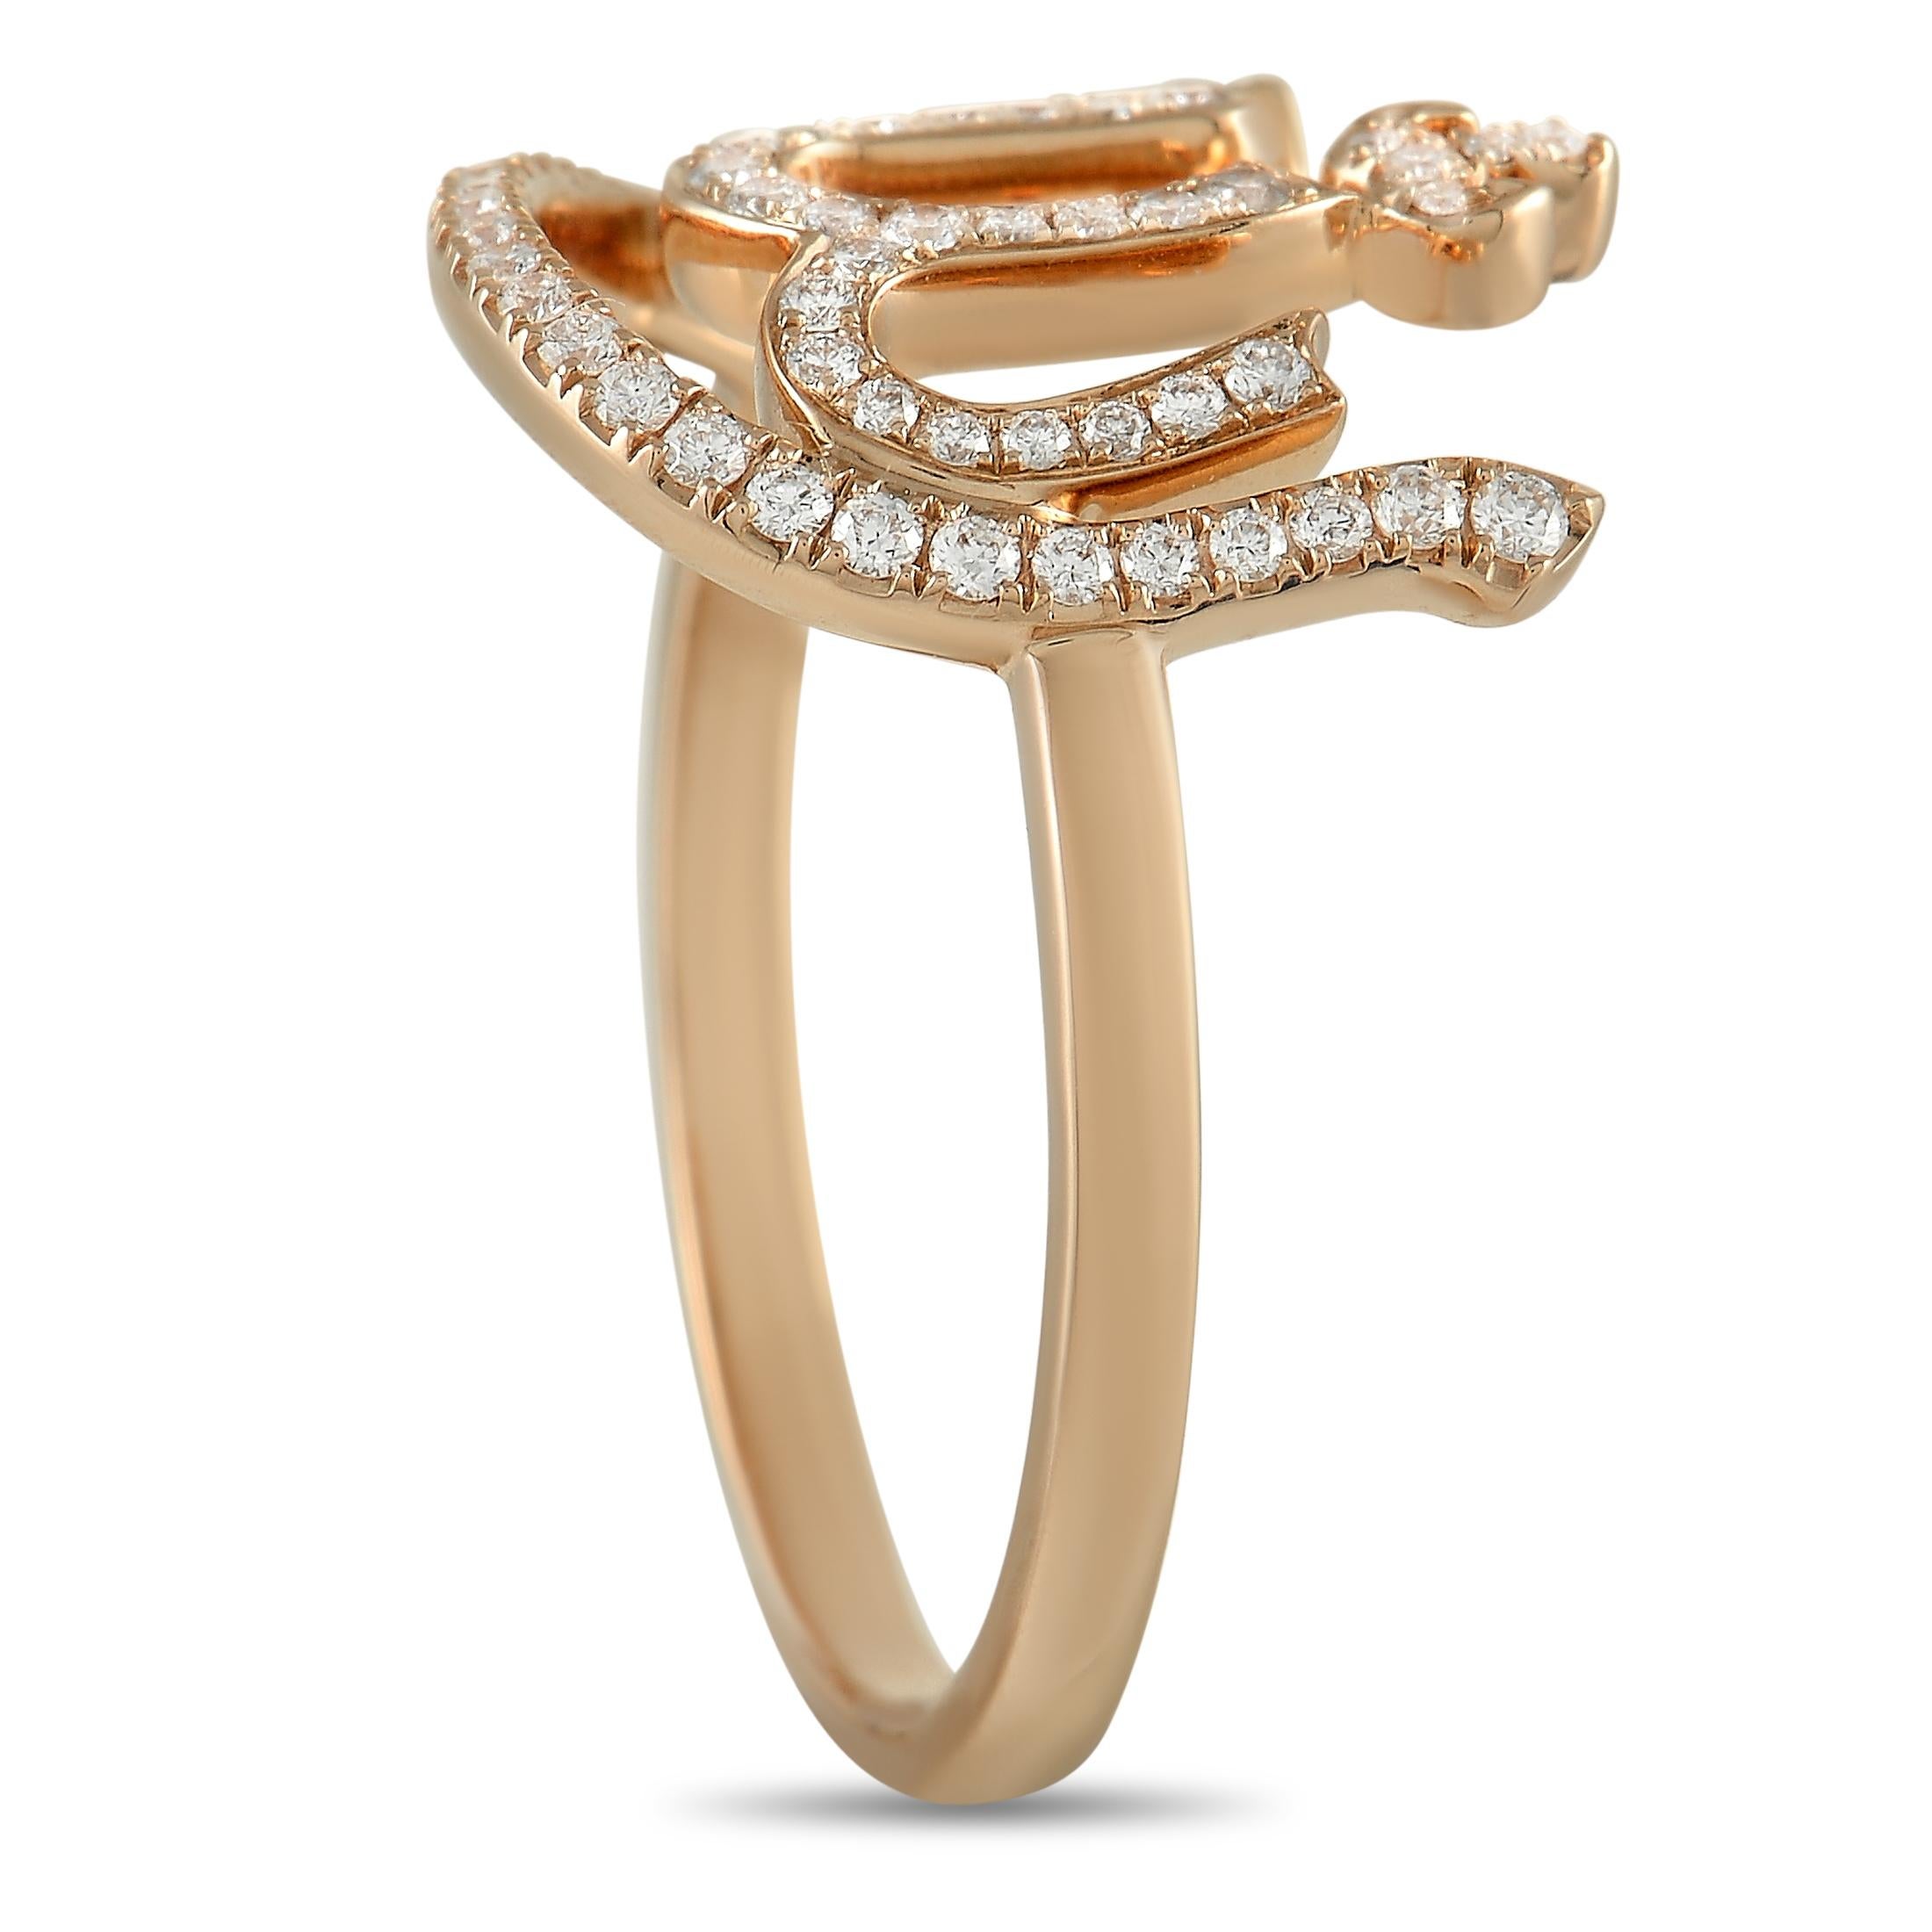 This Messika Faith Allah 18K Rose Gold 0.21 ct Diamond Ring is made with warm 18K Rose Gold, and set with 0.21 carats of beautiful small round-cut diamonds. The ring has a band thickness of 2 mm, a top height of 4 mm, and top dimensions of 20 by 15